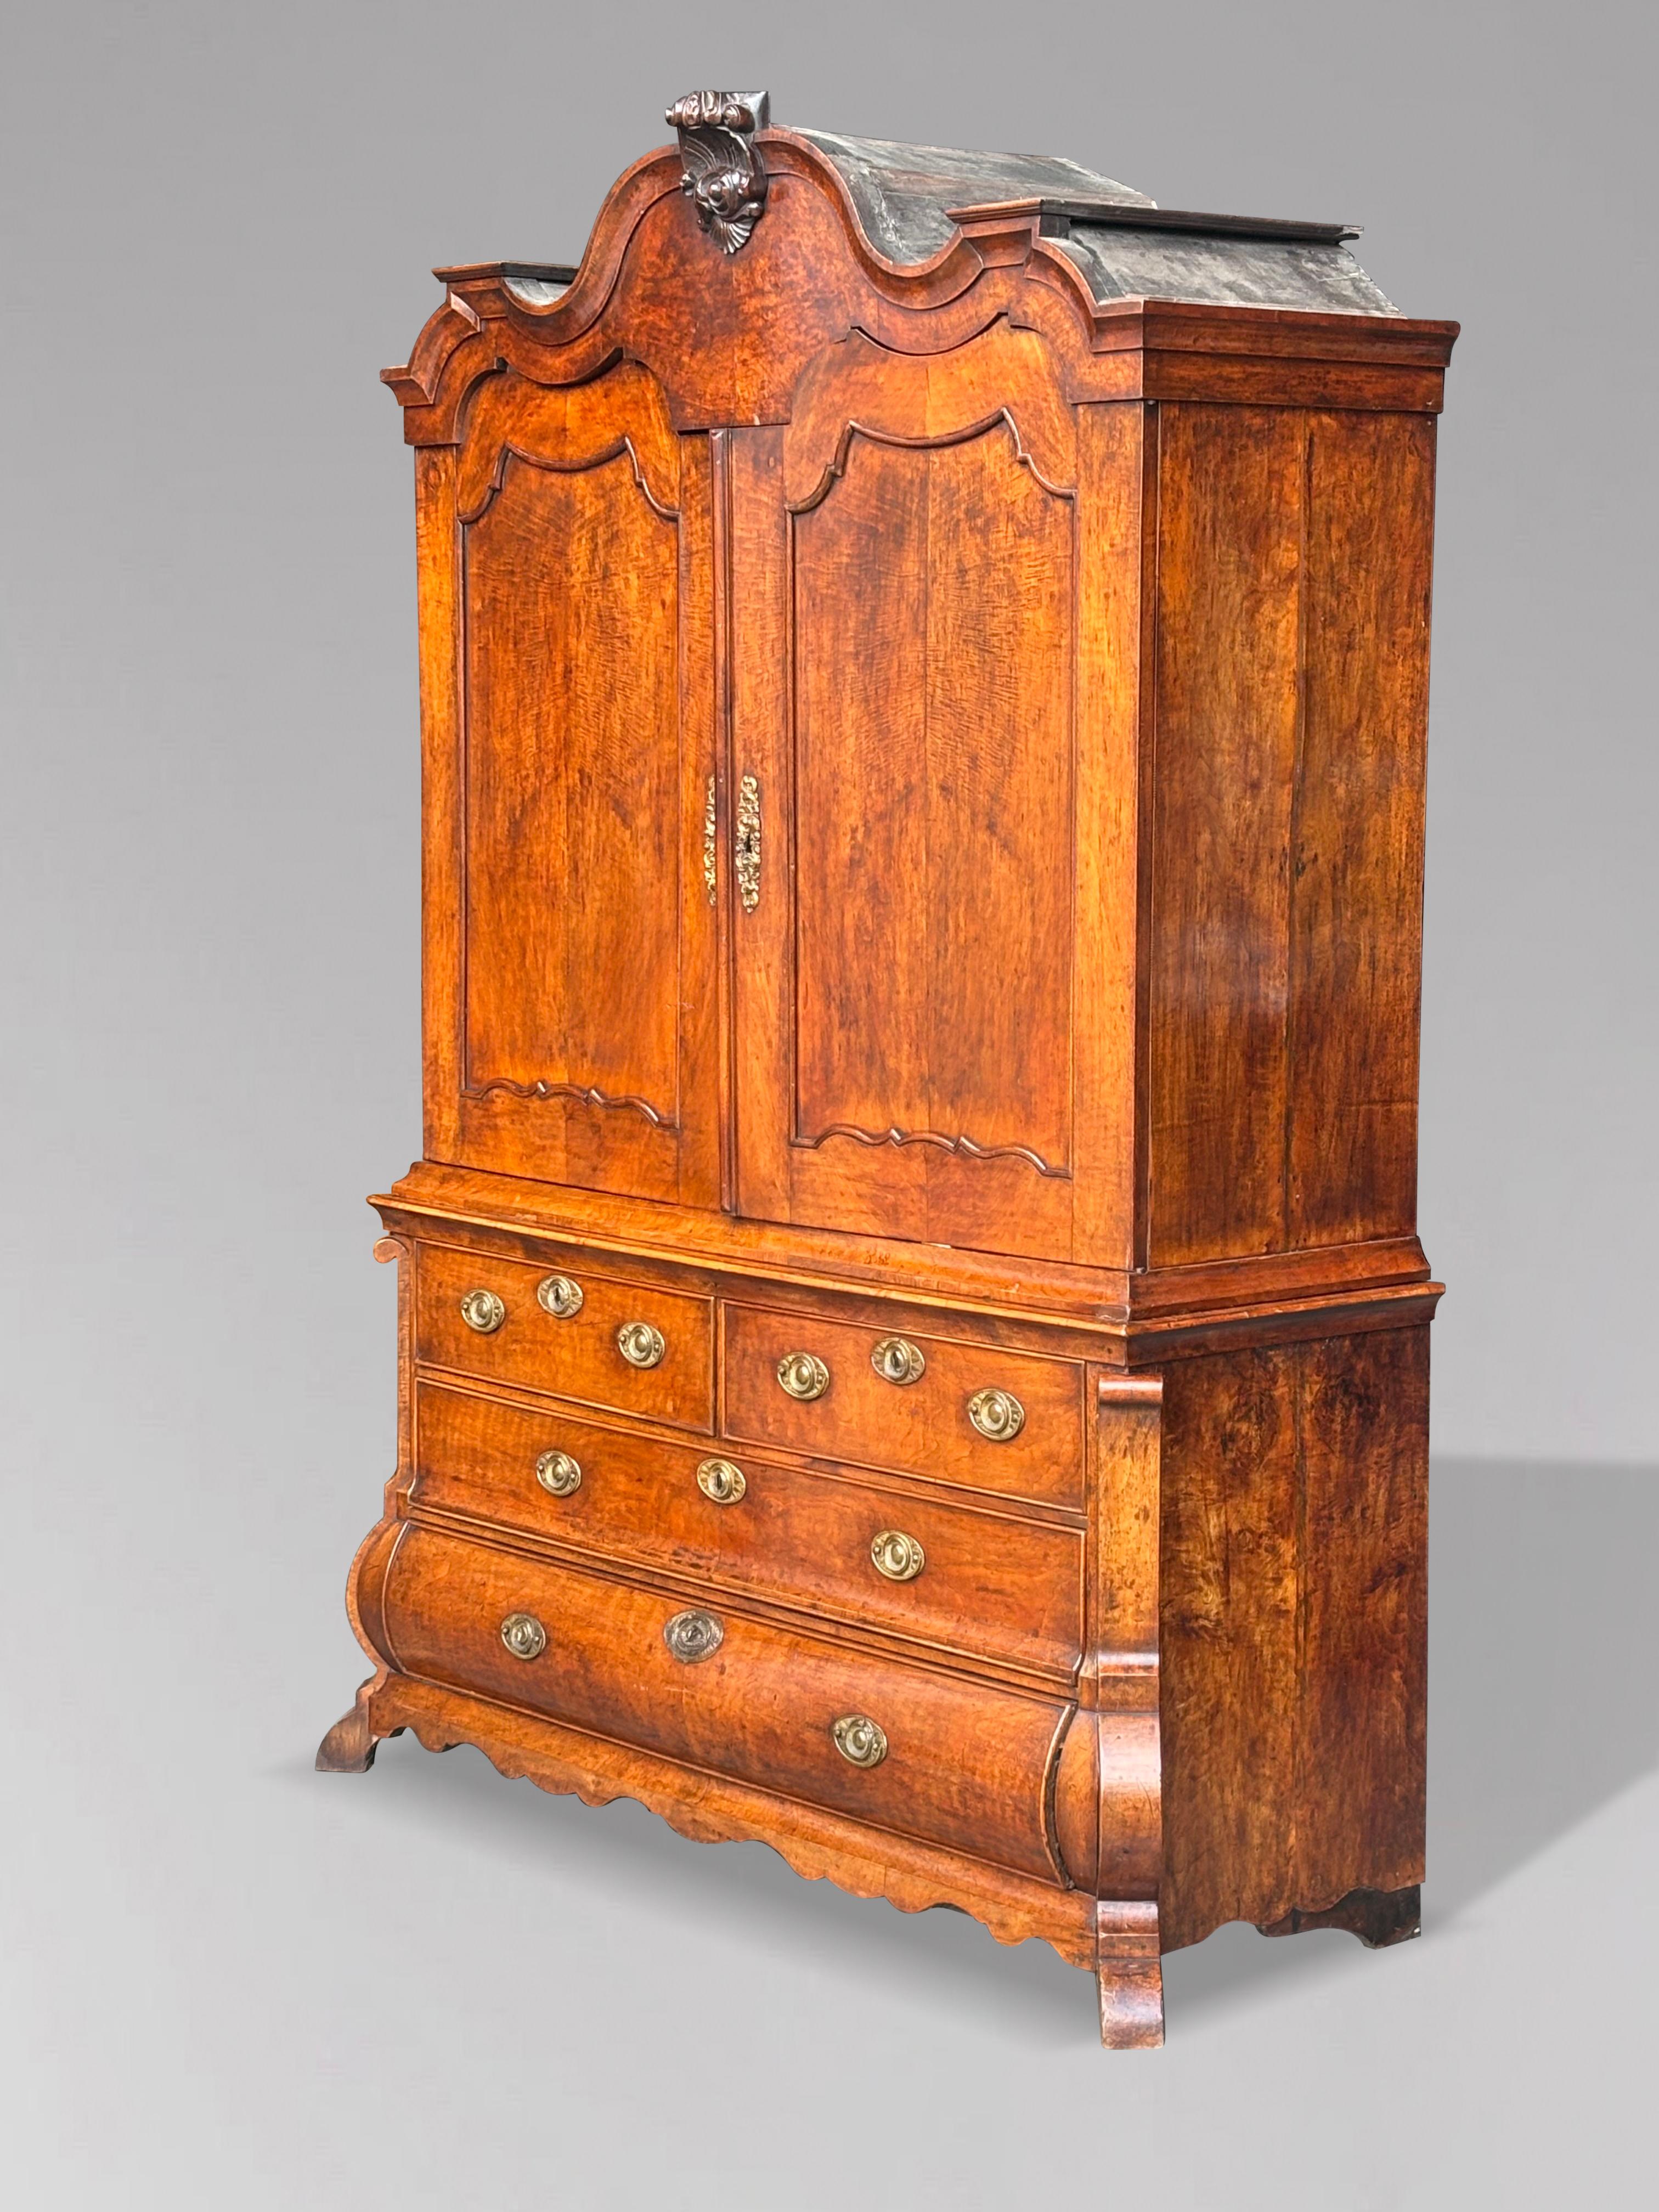 A very fine mid 18th century three part Dutch rococo walnut cabinet on a bombé chest. A decorative carved arched pediment with carved shell crest and a finely moulded cornice above two wavy top shaped panelled doors, opening to storage shelves with